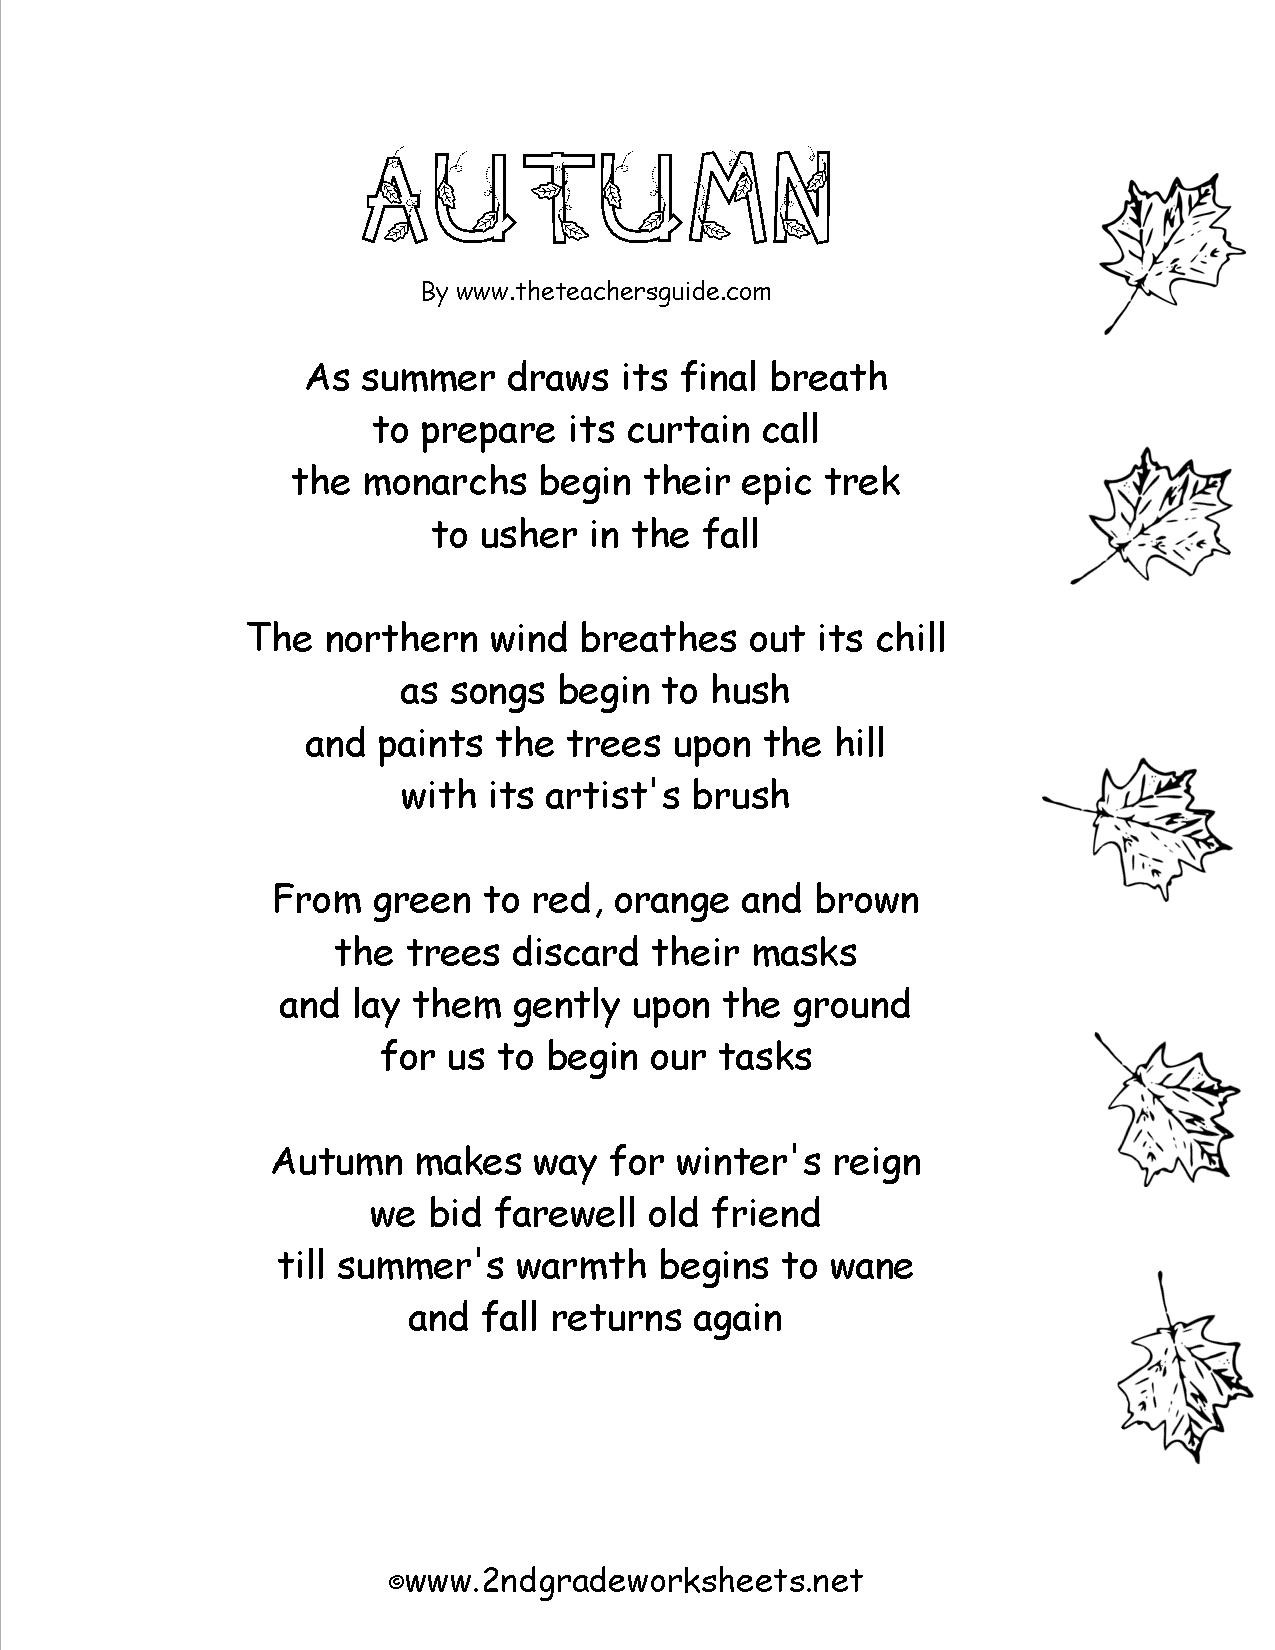 Theme Worksheets 2nd Grade Autumn theme Worksheets and Printouts